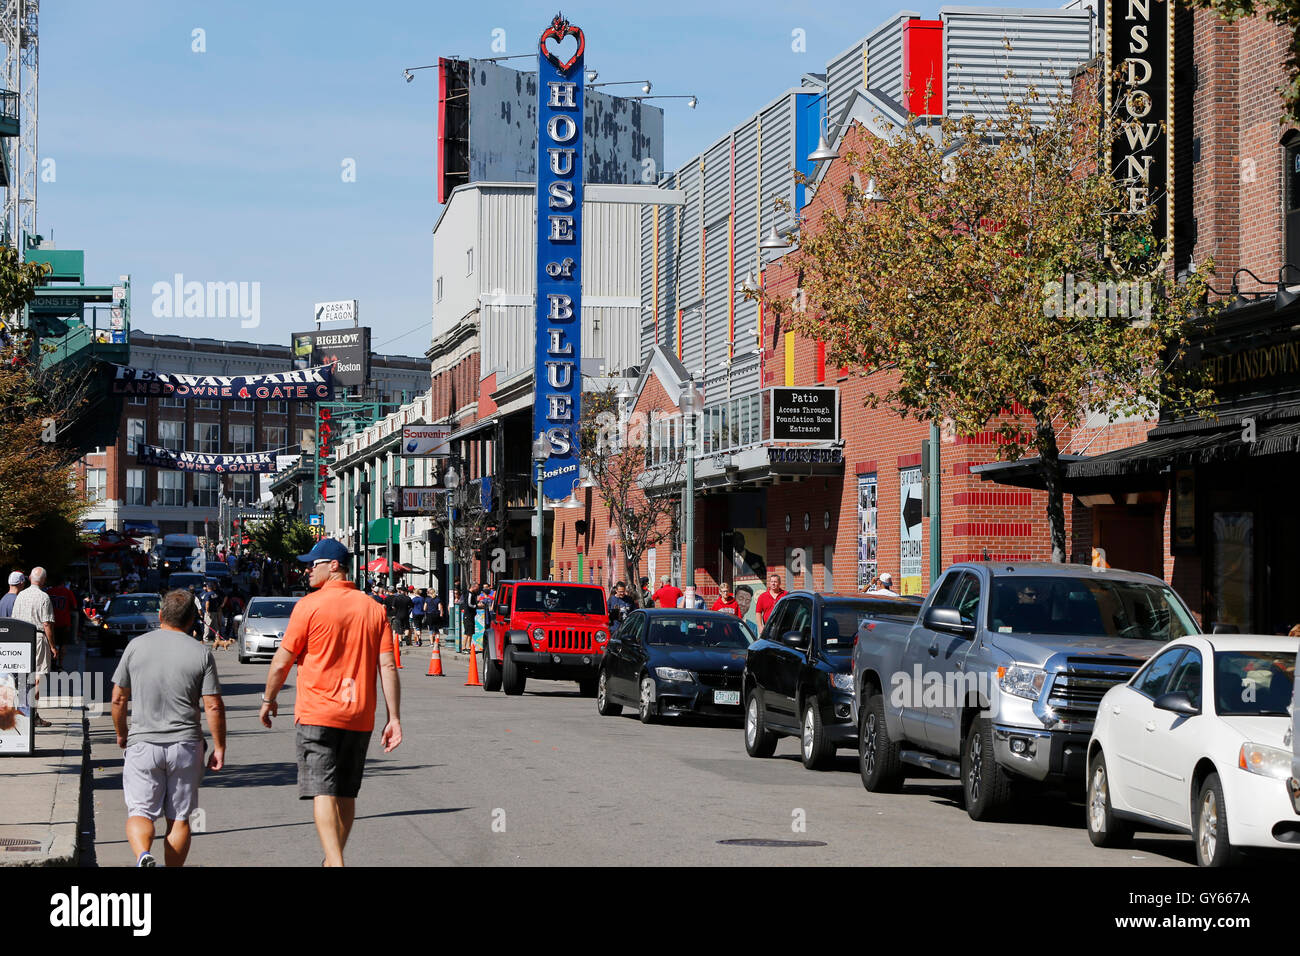 Fenway Park And The House Of Blues Along Landsdowne Street Stock Photo -  Download Image Now - iStock